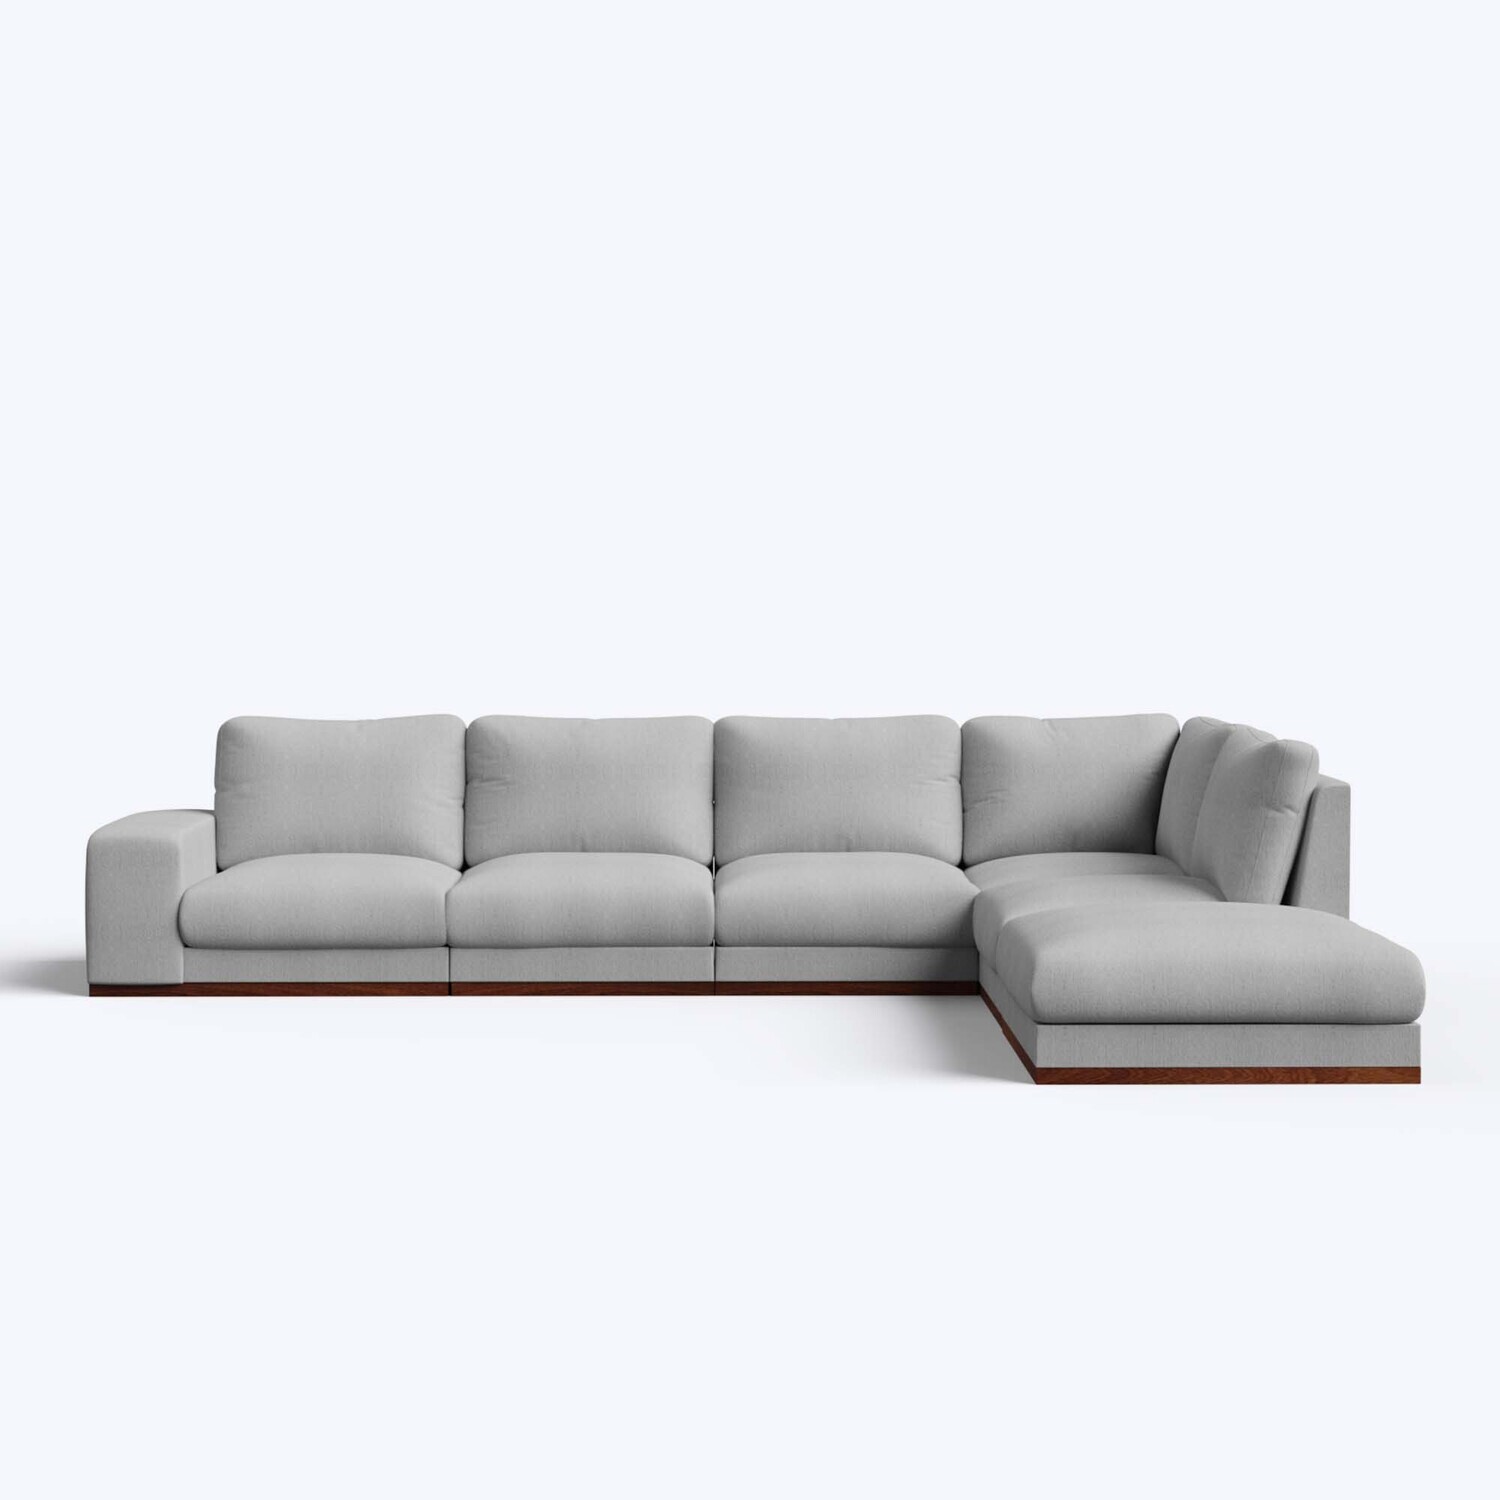 Derek modular right arm 5 seater sofa with ottoman - 127.5" | 61.6" Left chaise with 34" Ottoman